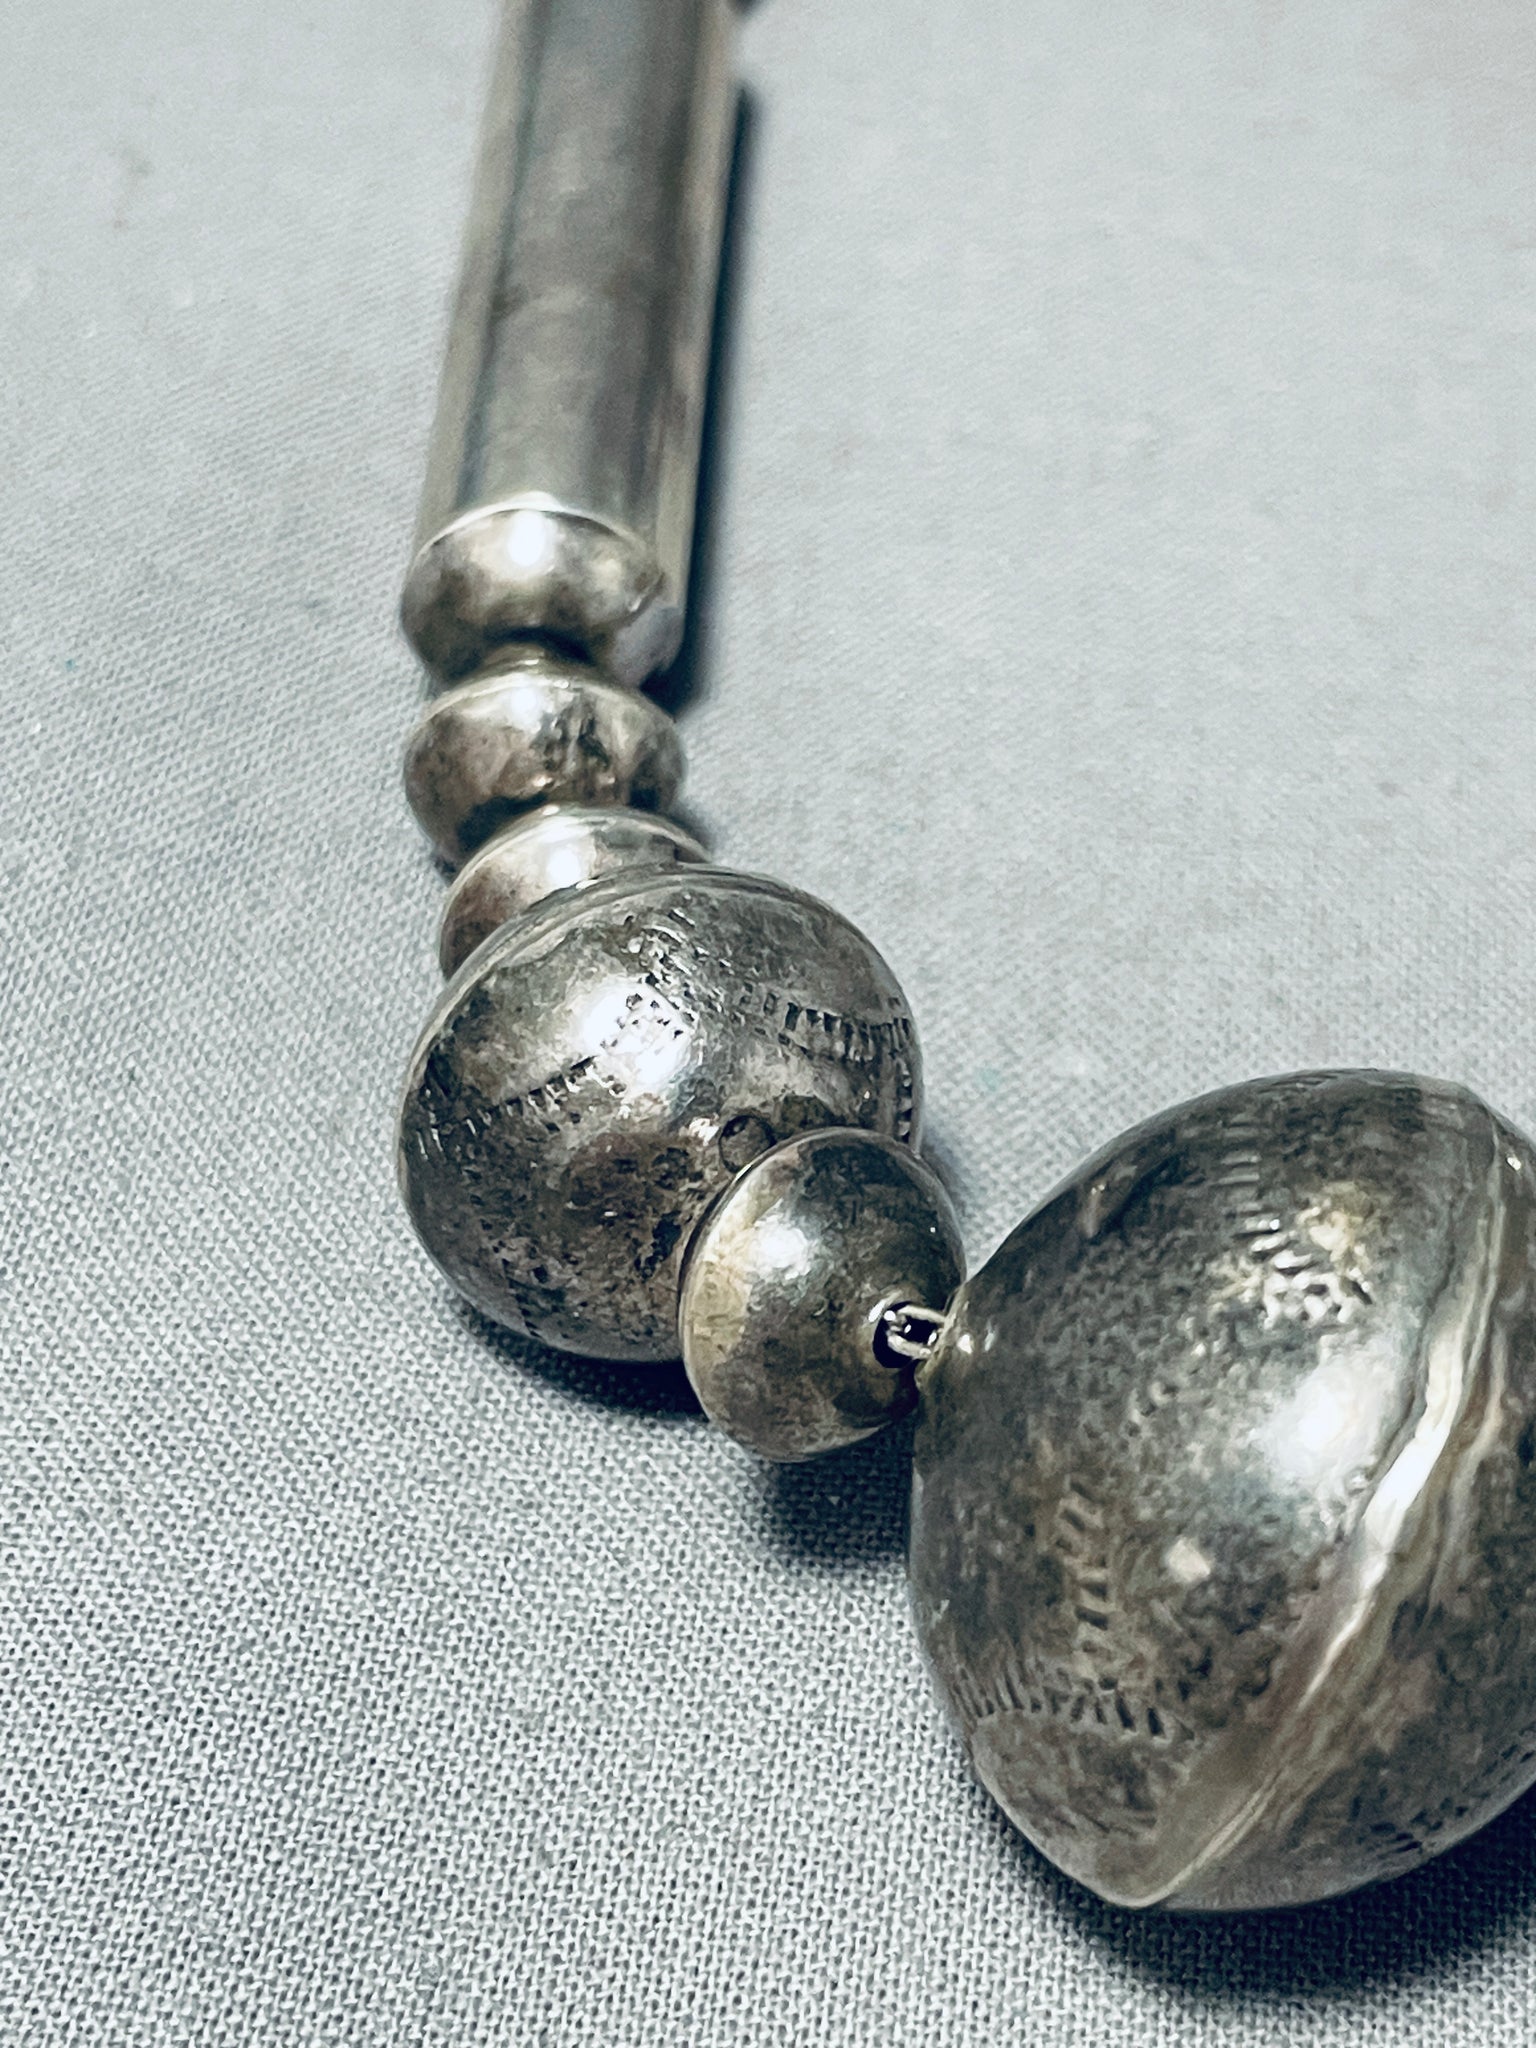 Antique Silver Beads from India